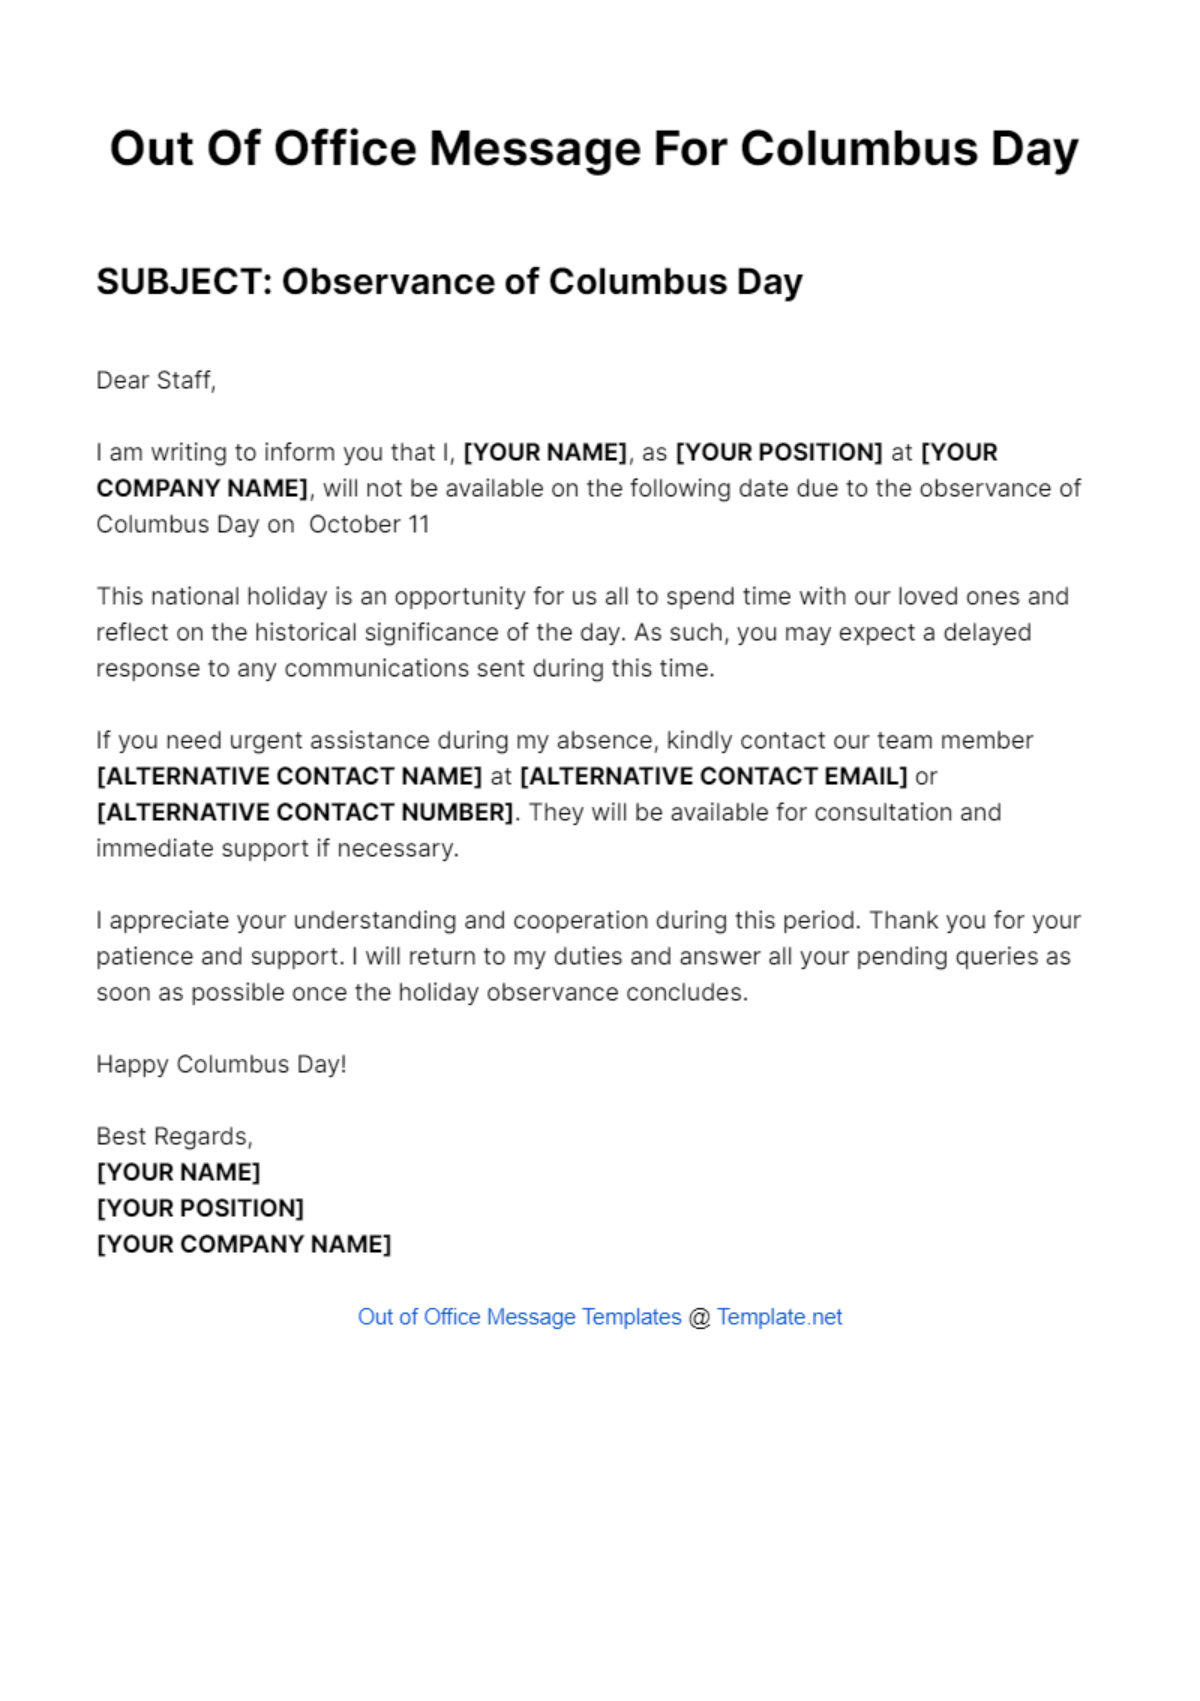 Free Out Of Office Message For Columbus Day Template